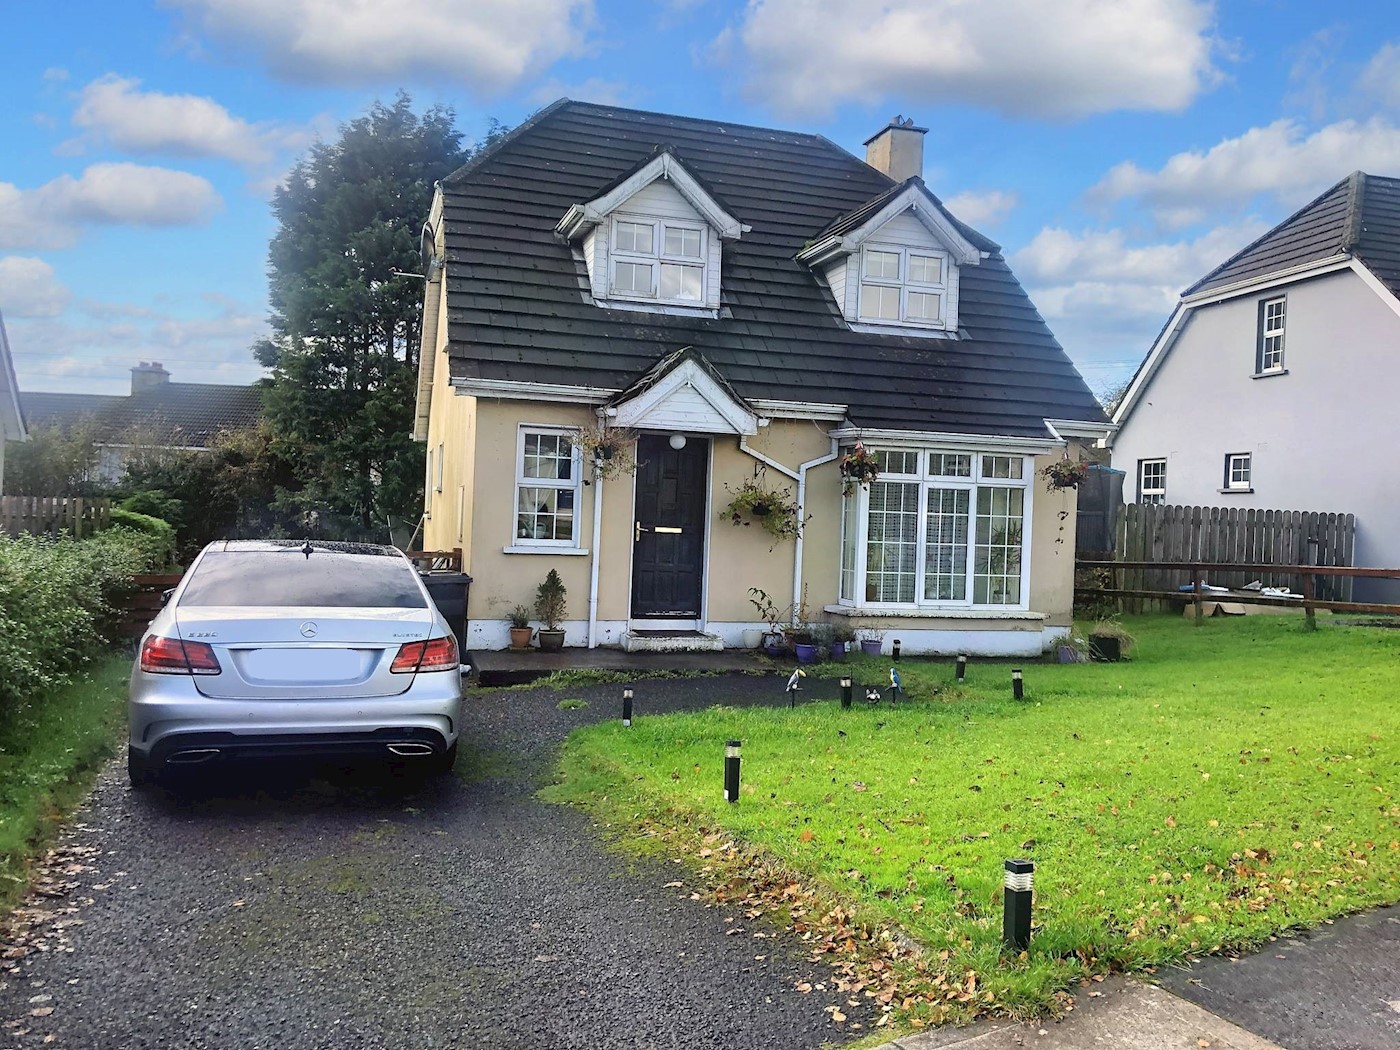 15 Orchard Drive, Donegal Town, Co. Donegal, F94 T9K5 1/6